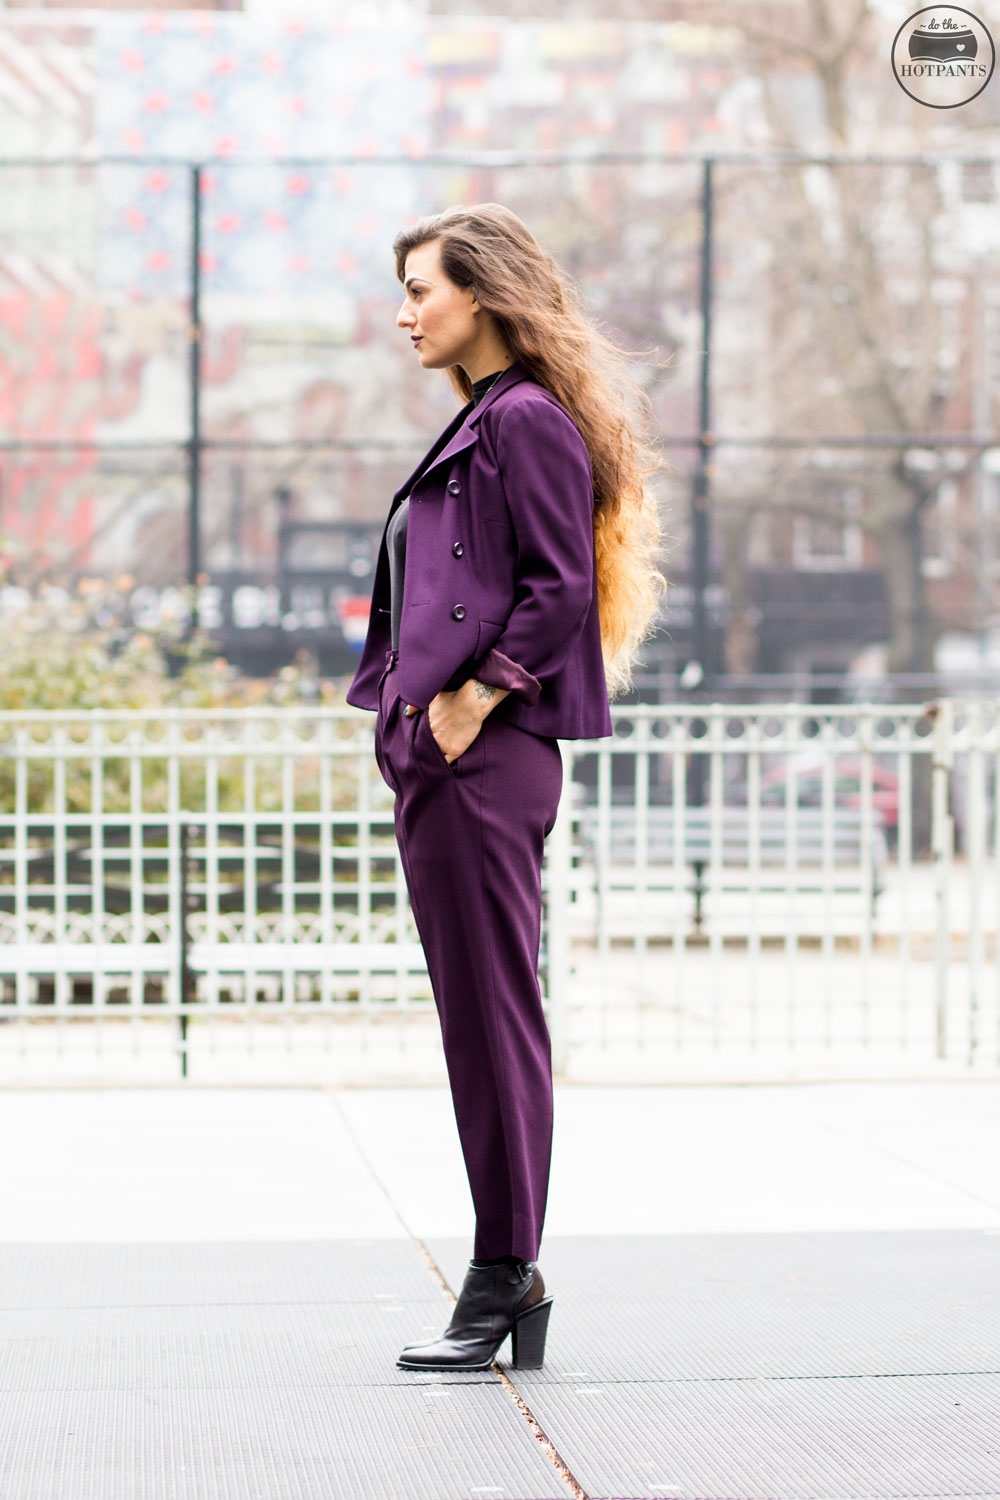 Long Ombre Hair New York City Blogger Cool Winter Outfit